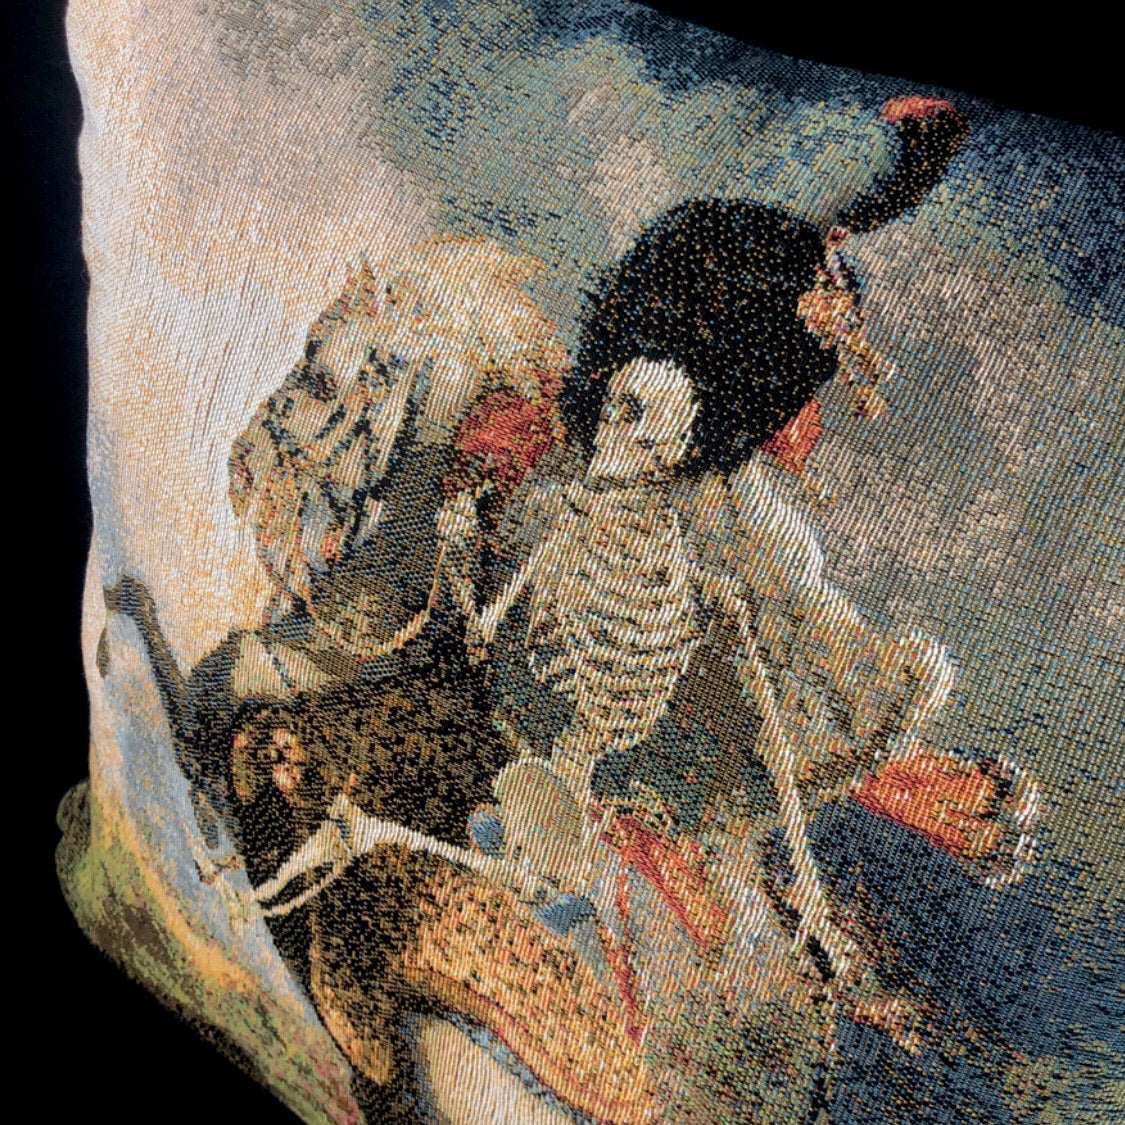 Top view of woven thread detail on Mounted Skeleton Pillow